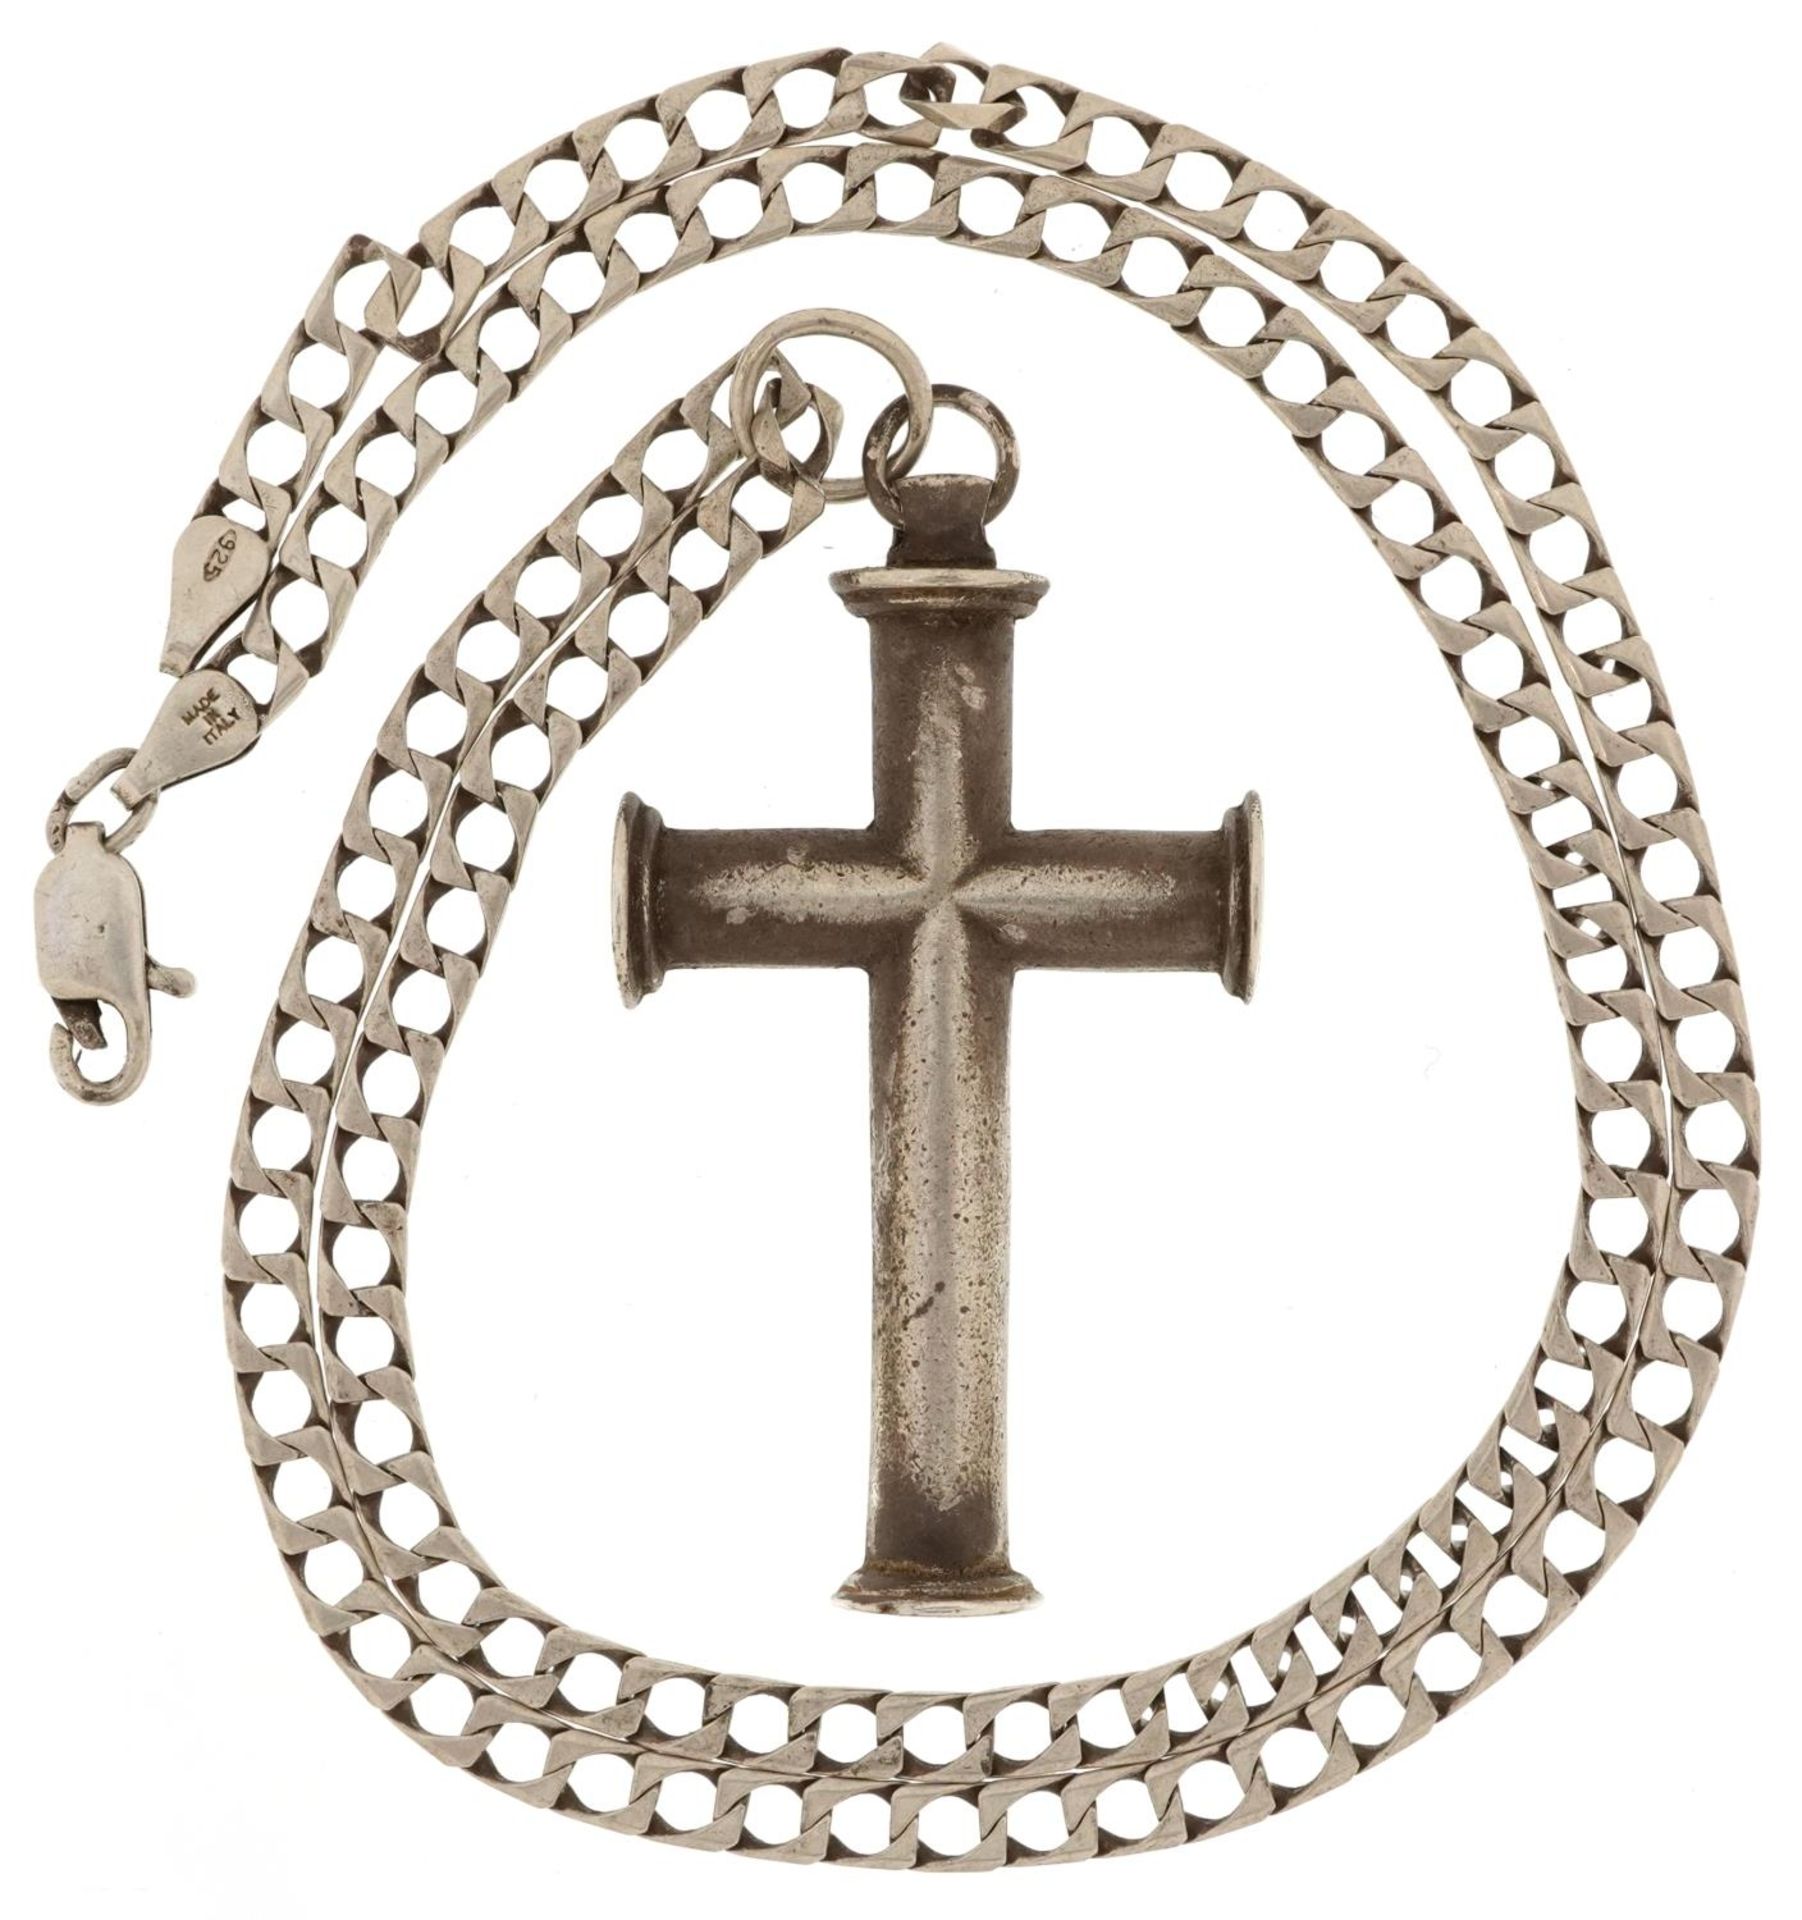 Large silver cross pendant on a silver necklace, 5.5cm high and 54cm in length, 30.8g - Image 2 of 4